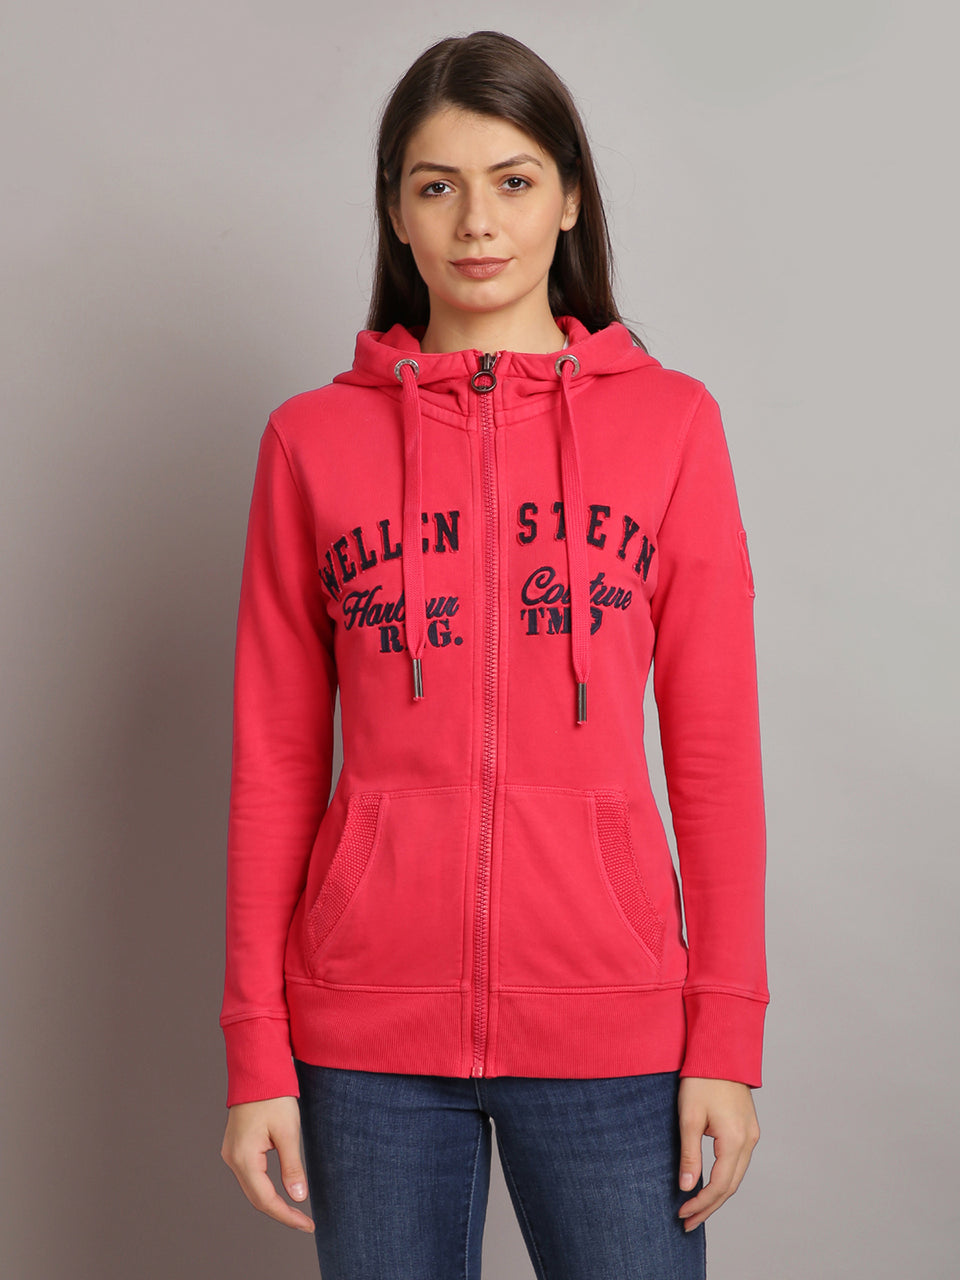 Buy womens red embroidered zip hooded sweatshirts online india